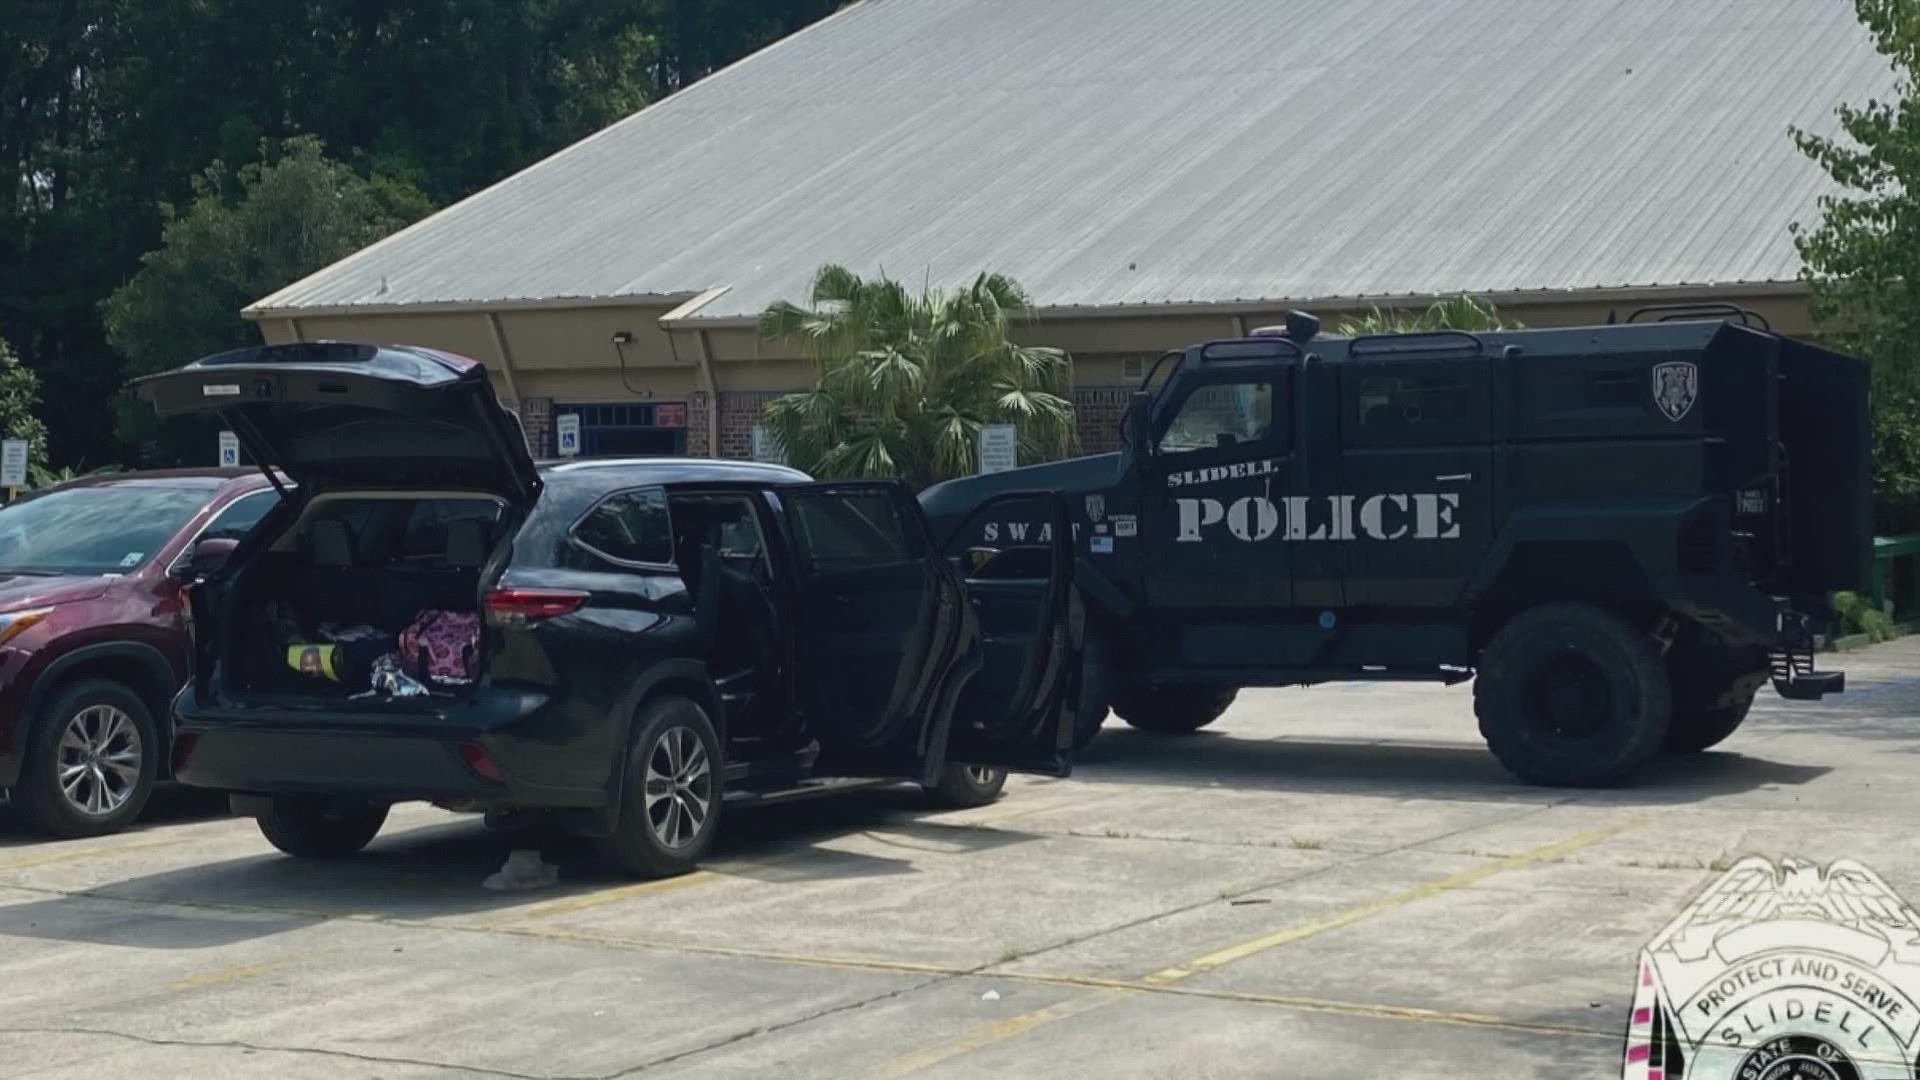 Slidell Police said they were alerted by the NOPD that the vehicle was possibly in the Slidell area and that a police detective located the vehicle in a park.